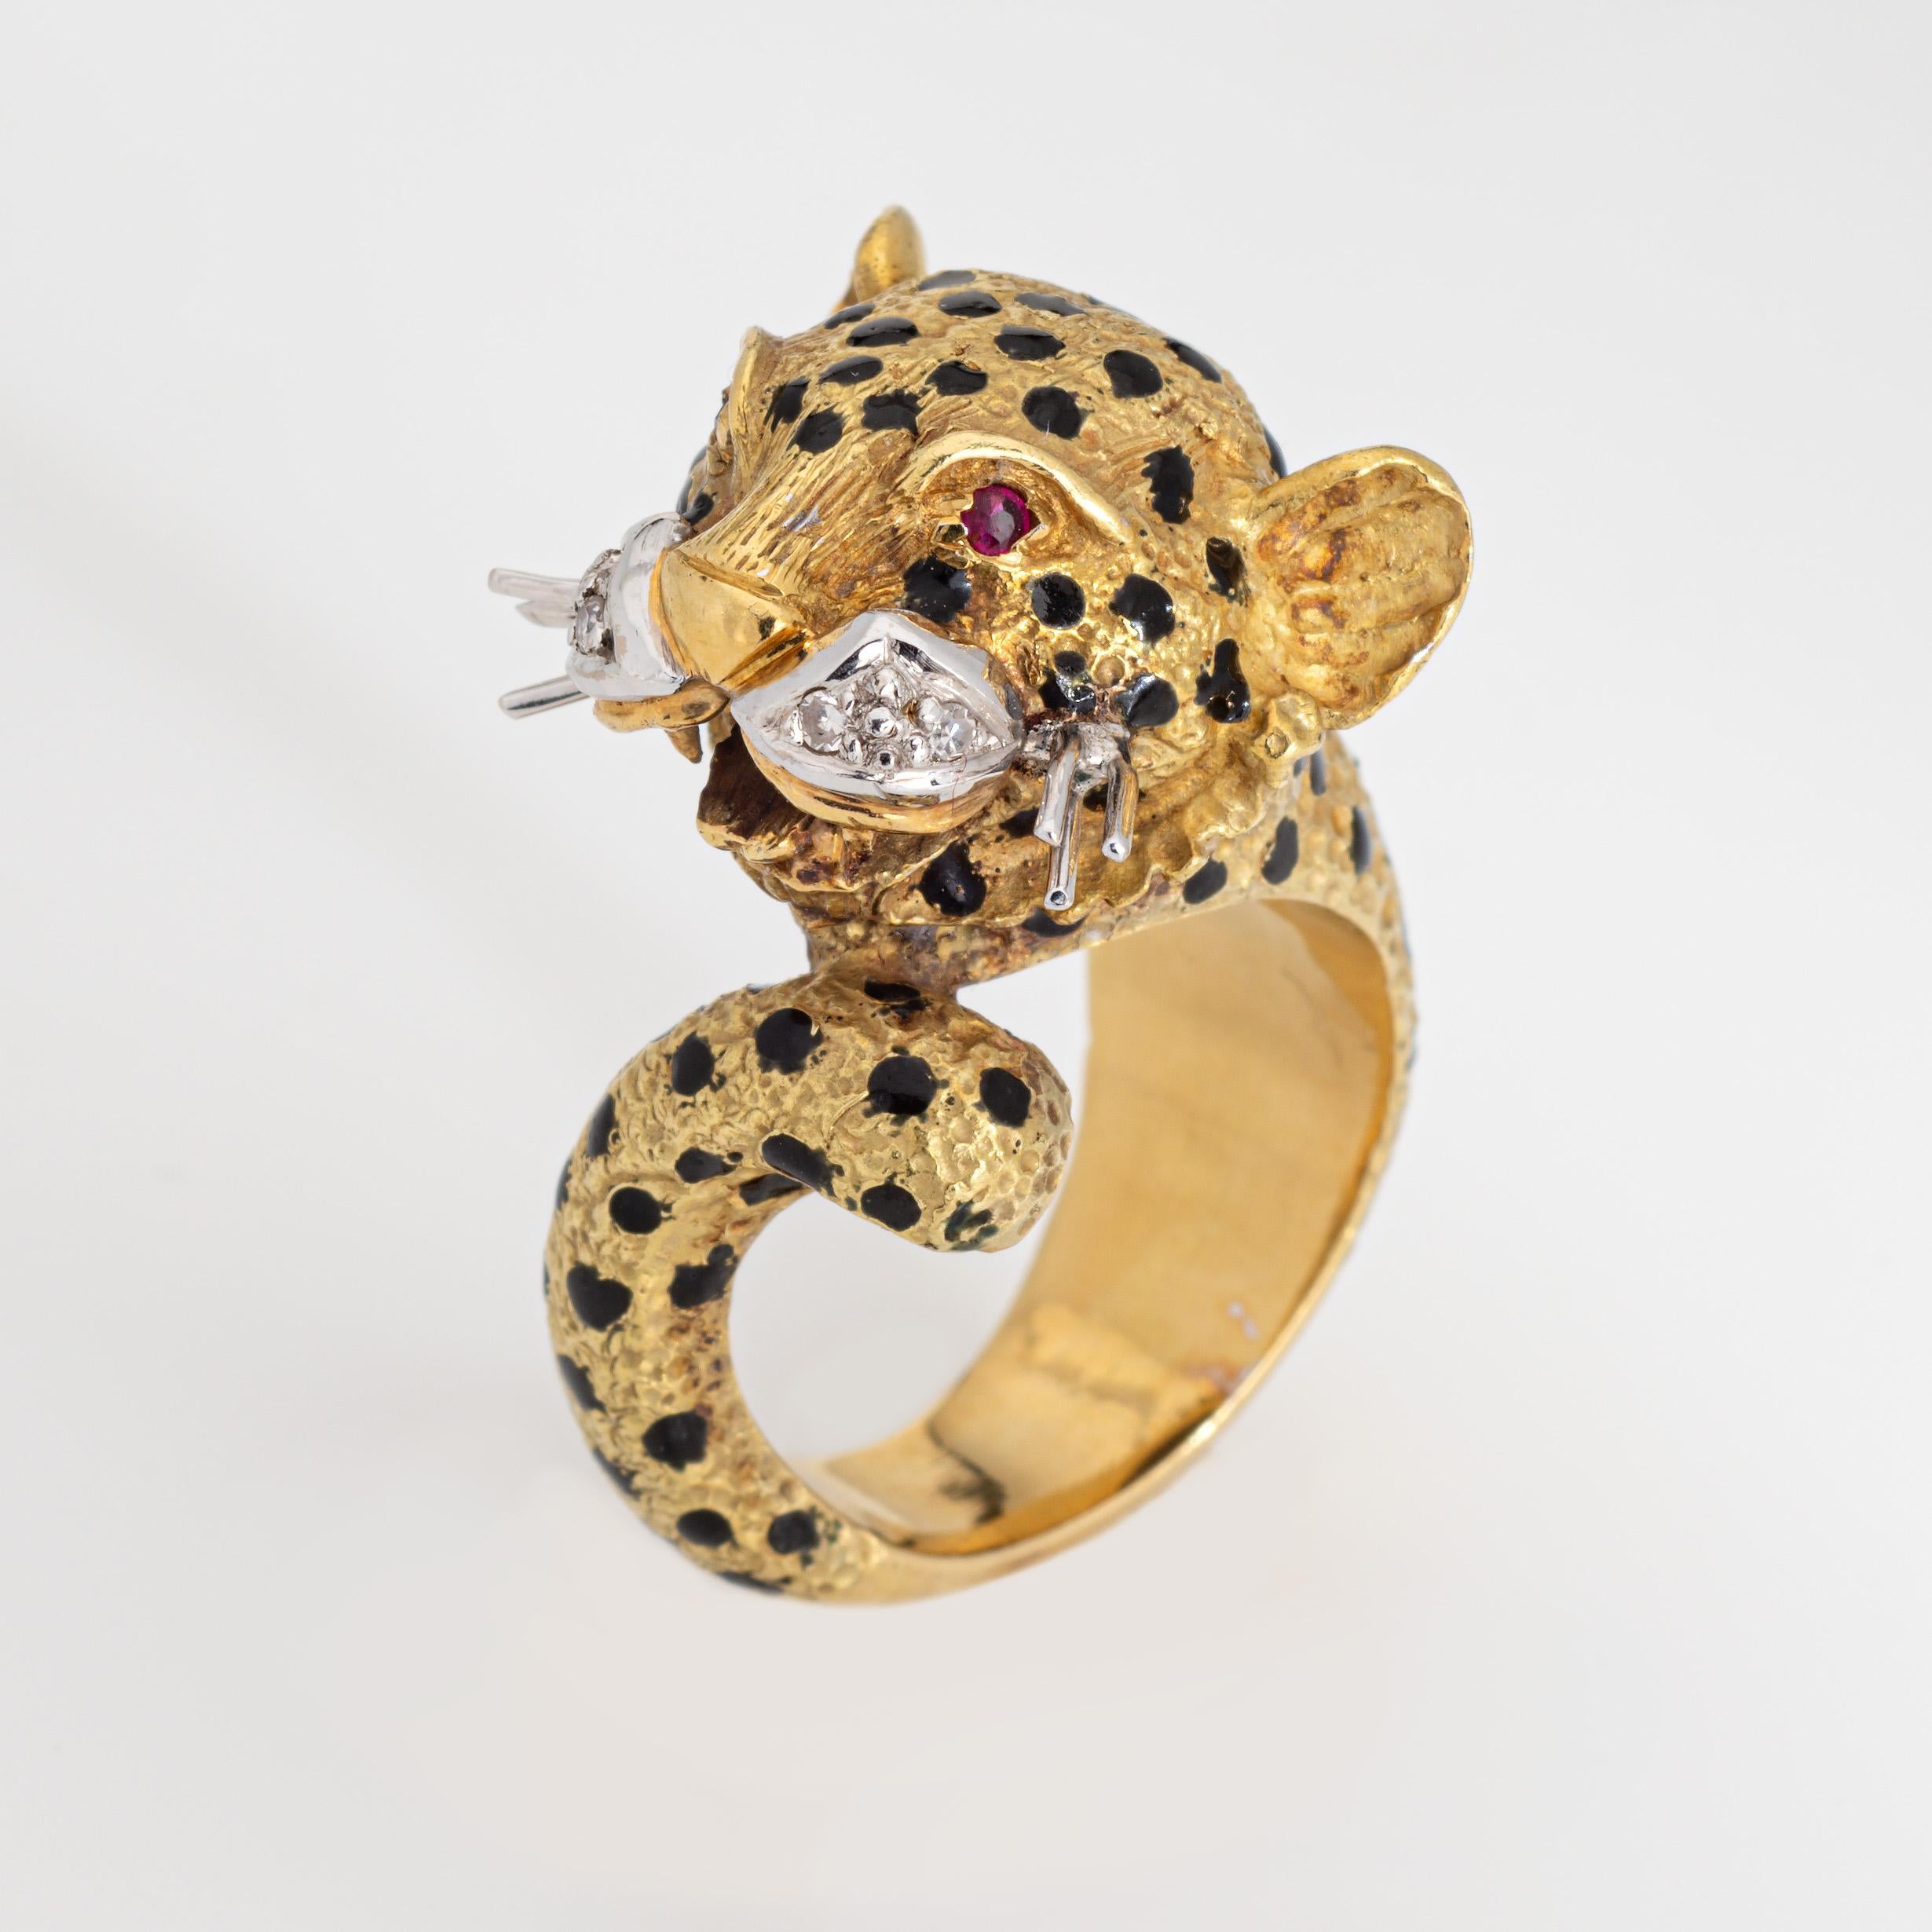 Finely detailed vintage leopard ring crafted in 18k yellow gold (circa 1960s to 1970s).  

4 diamonds total an estimated 0.02 carats (estimated at H-I color and SI2-I1 clarity). Two estimated 0.01 carat cut rubies are set into the eyes. 

The